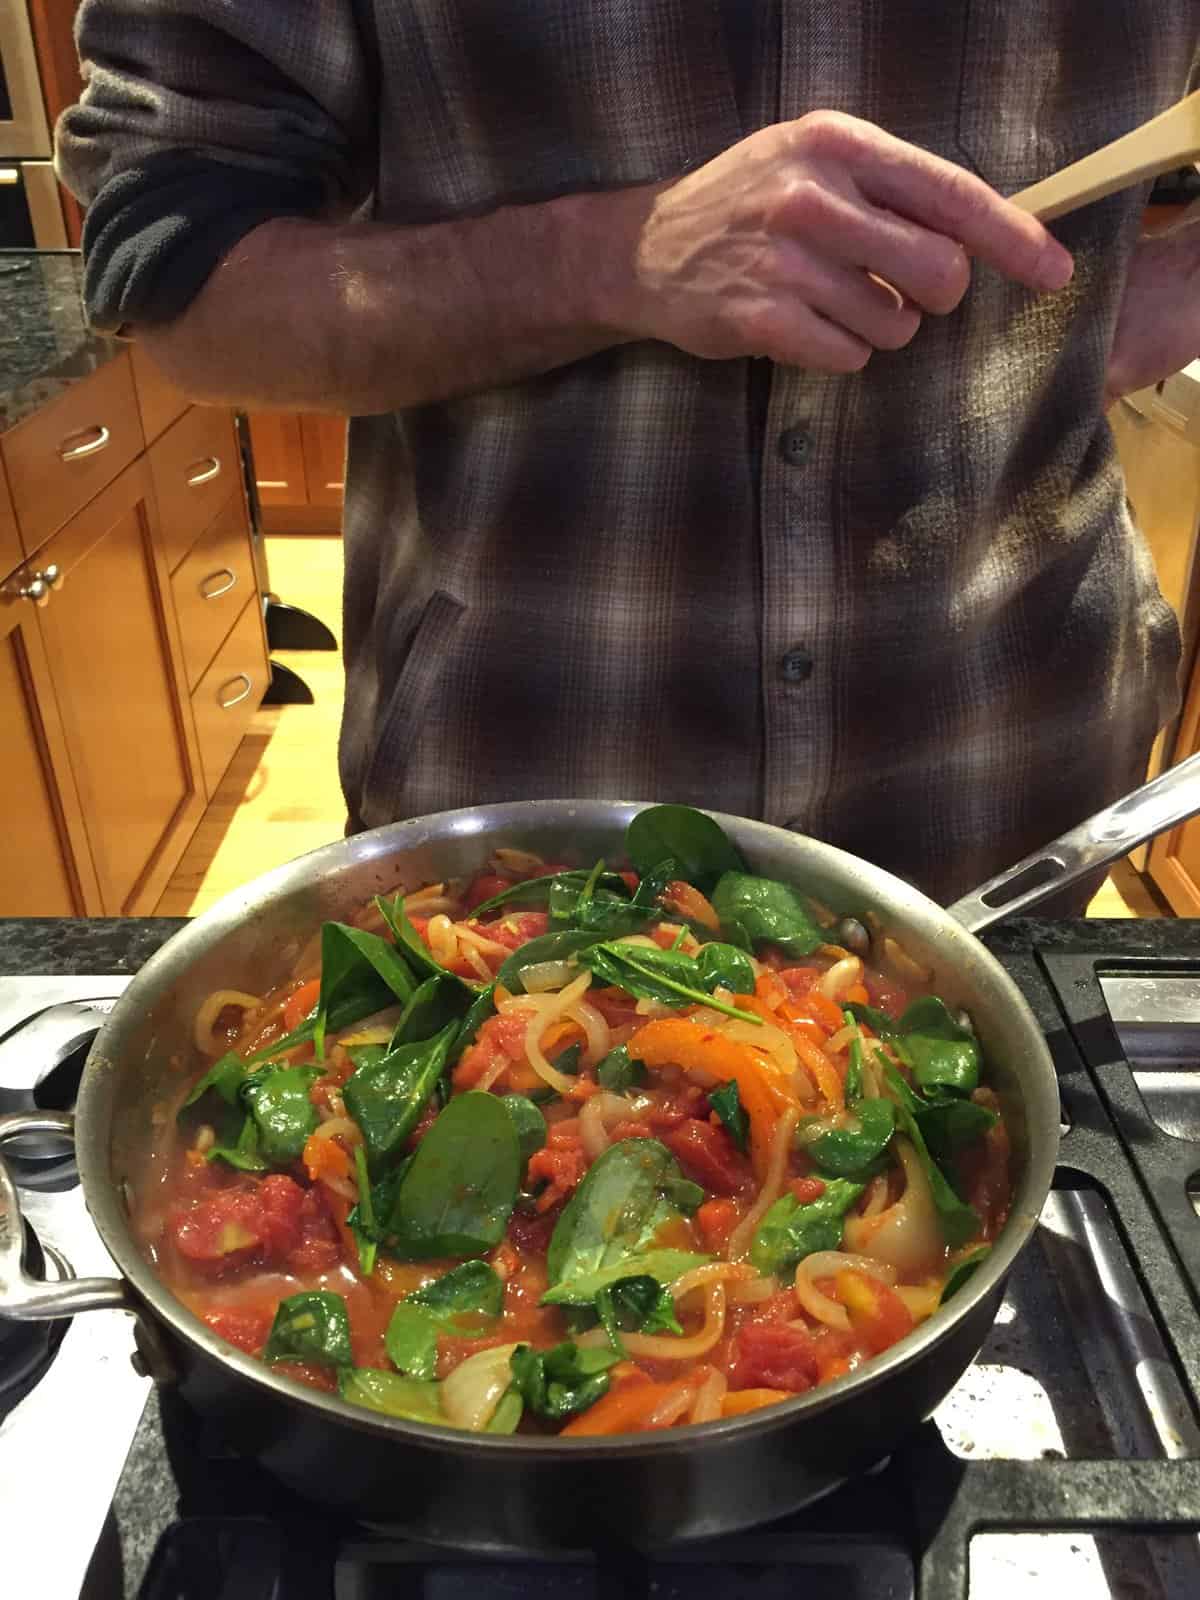 A pan with peppers, onions, tomatoes, and greens.